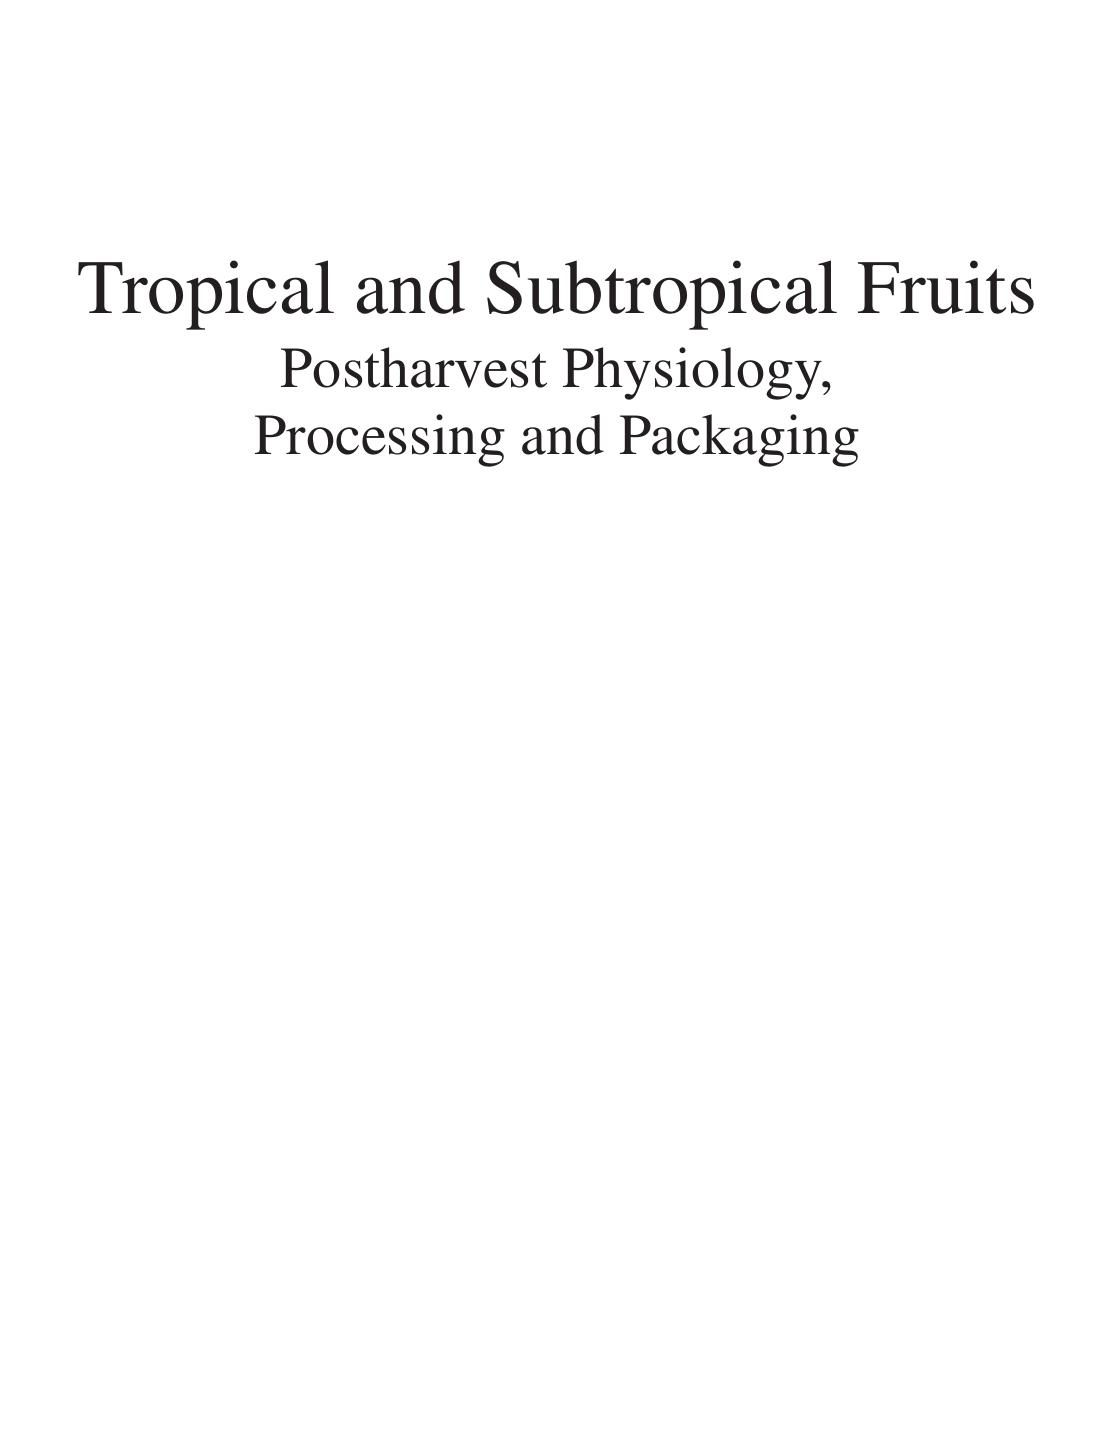 Tropical and Subtropical Fruits  Postharvest Physiology, Processing and Packaging ( PDFDrive ), 2012